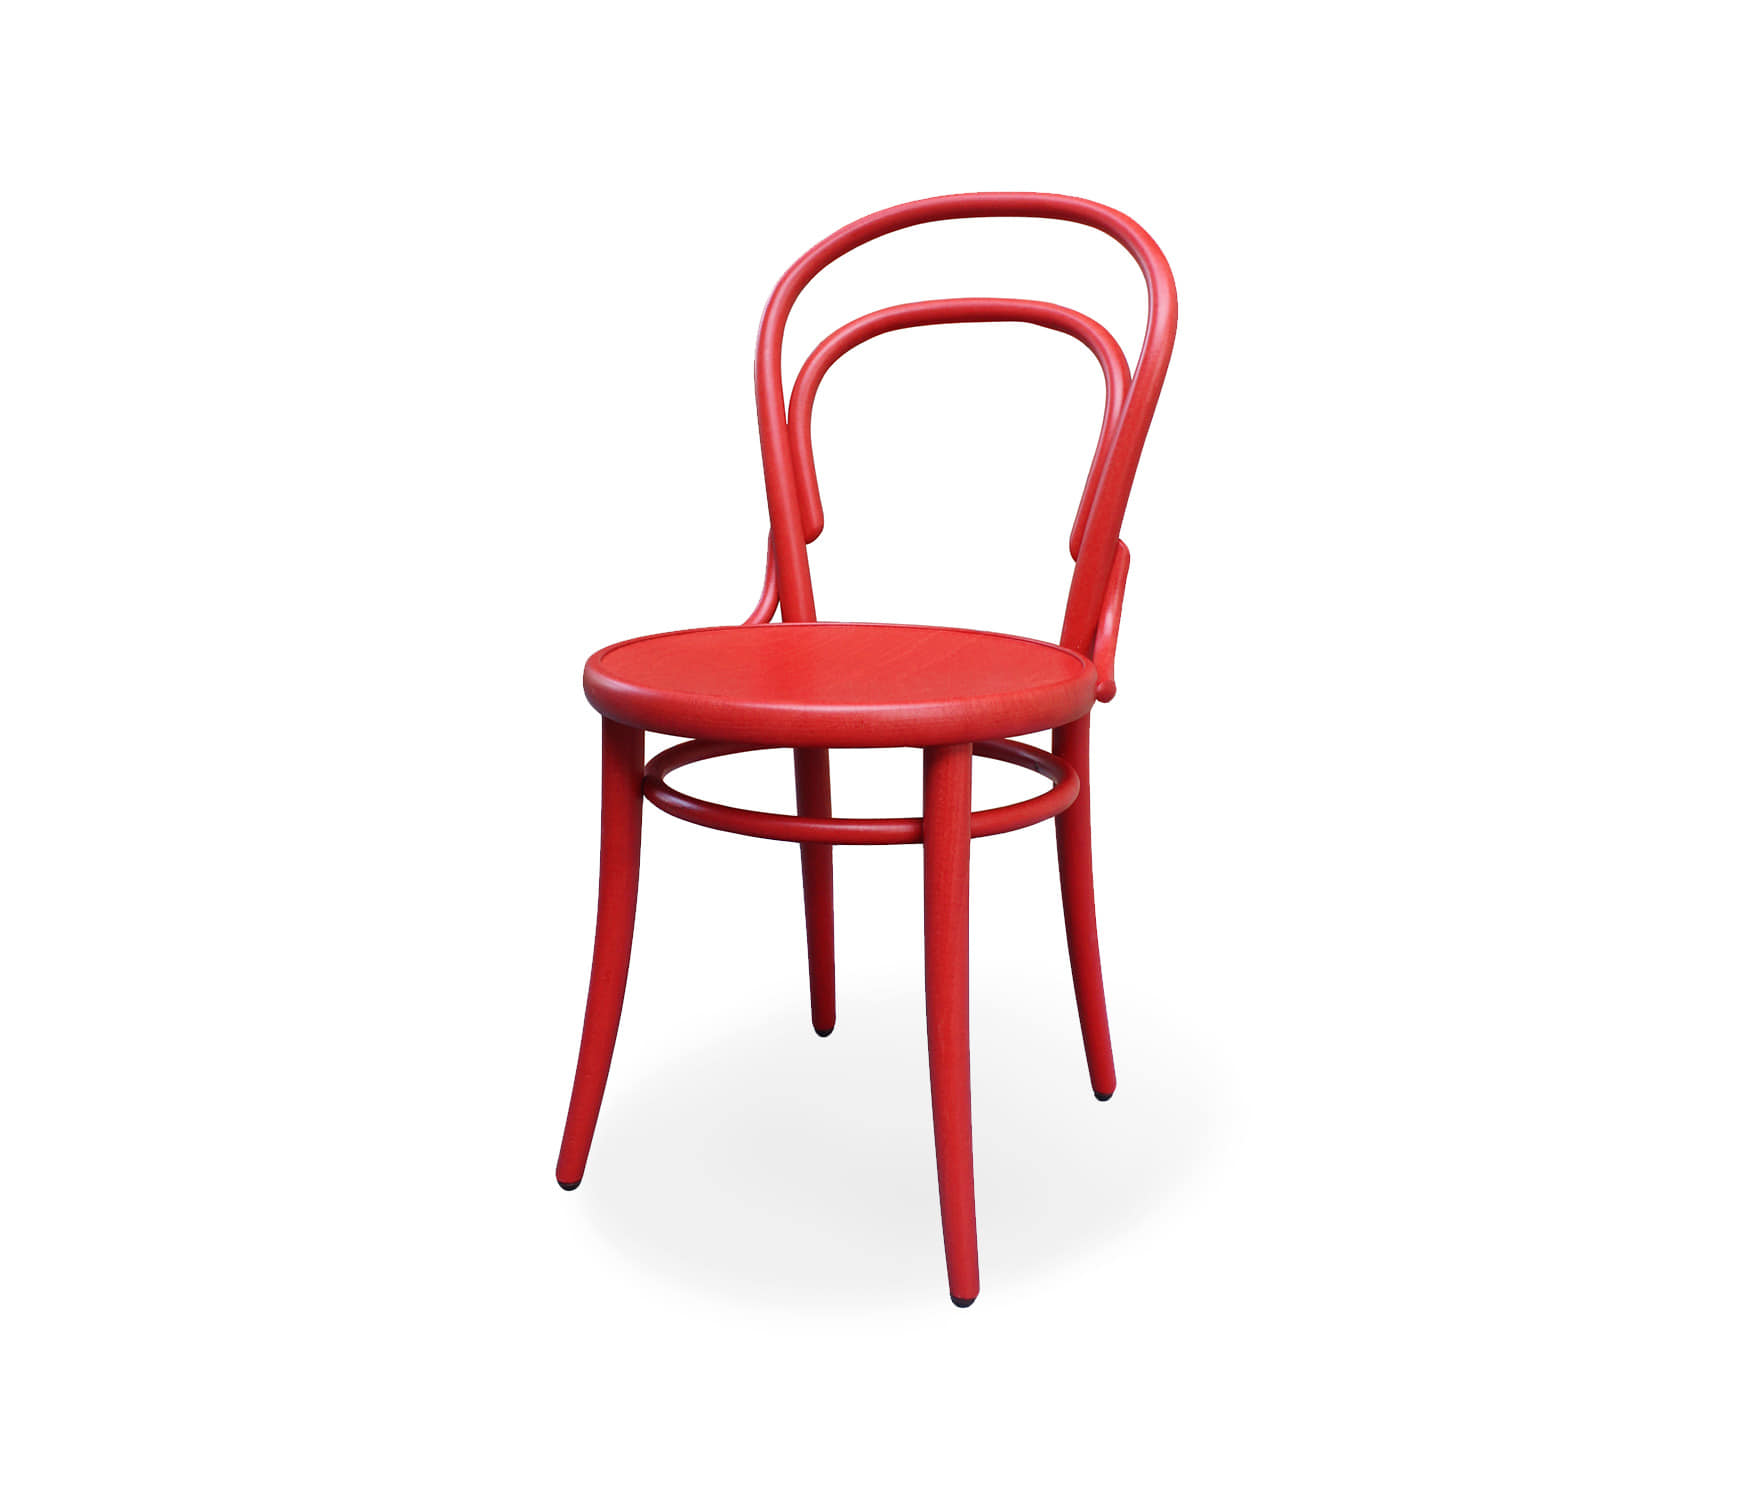 Chair 14 - Red